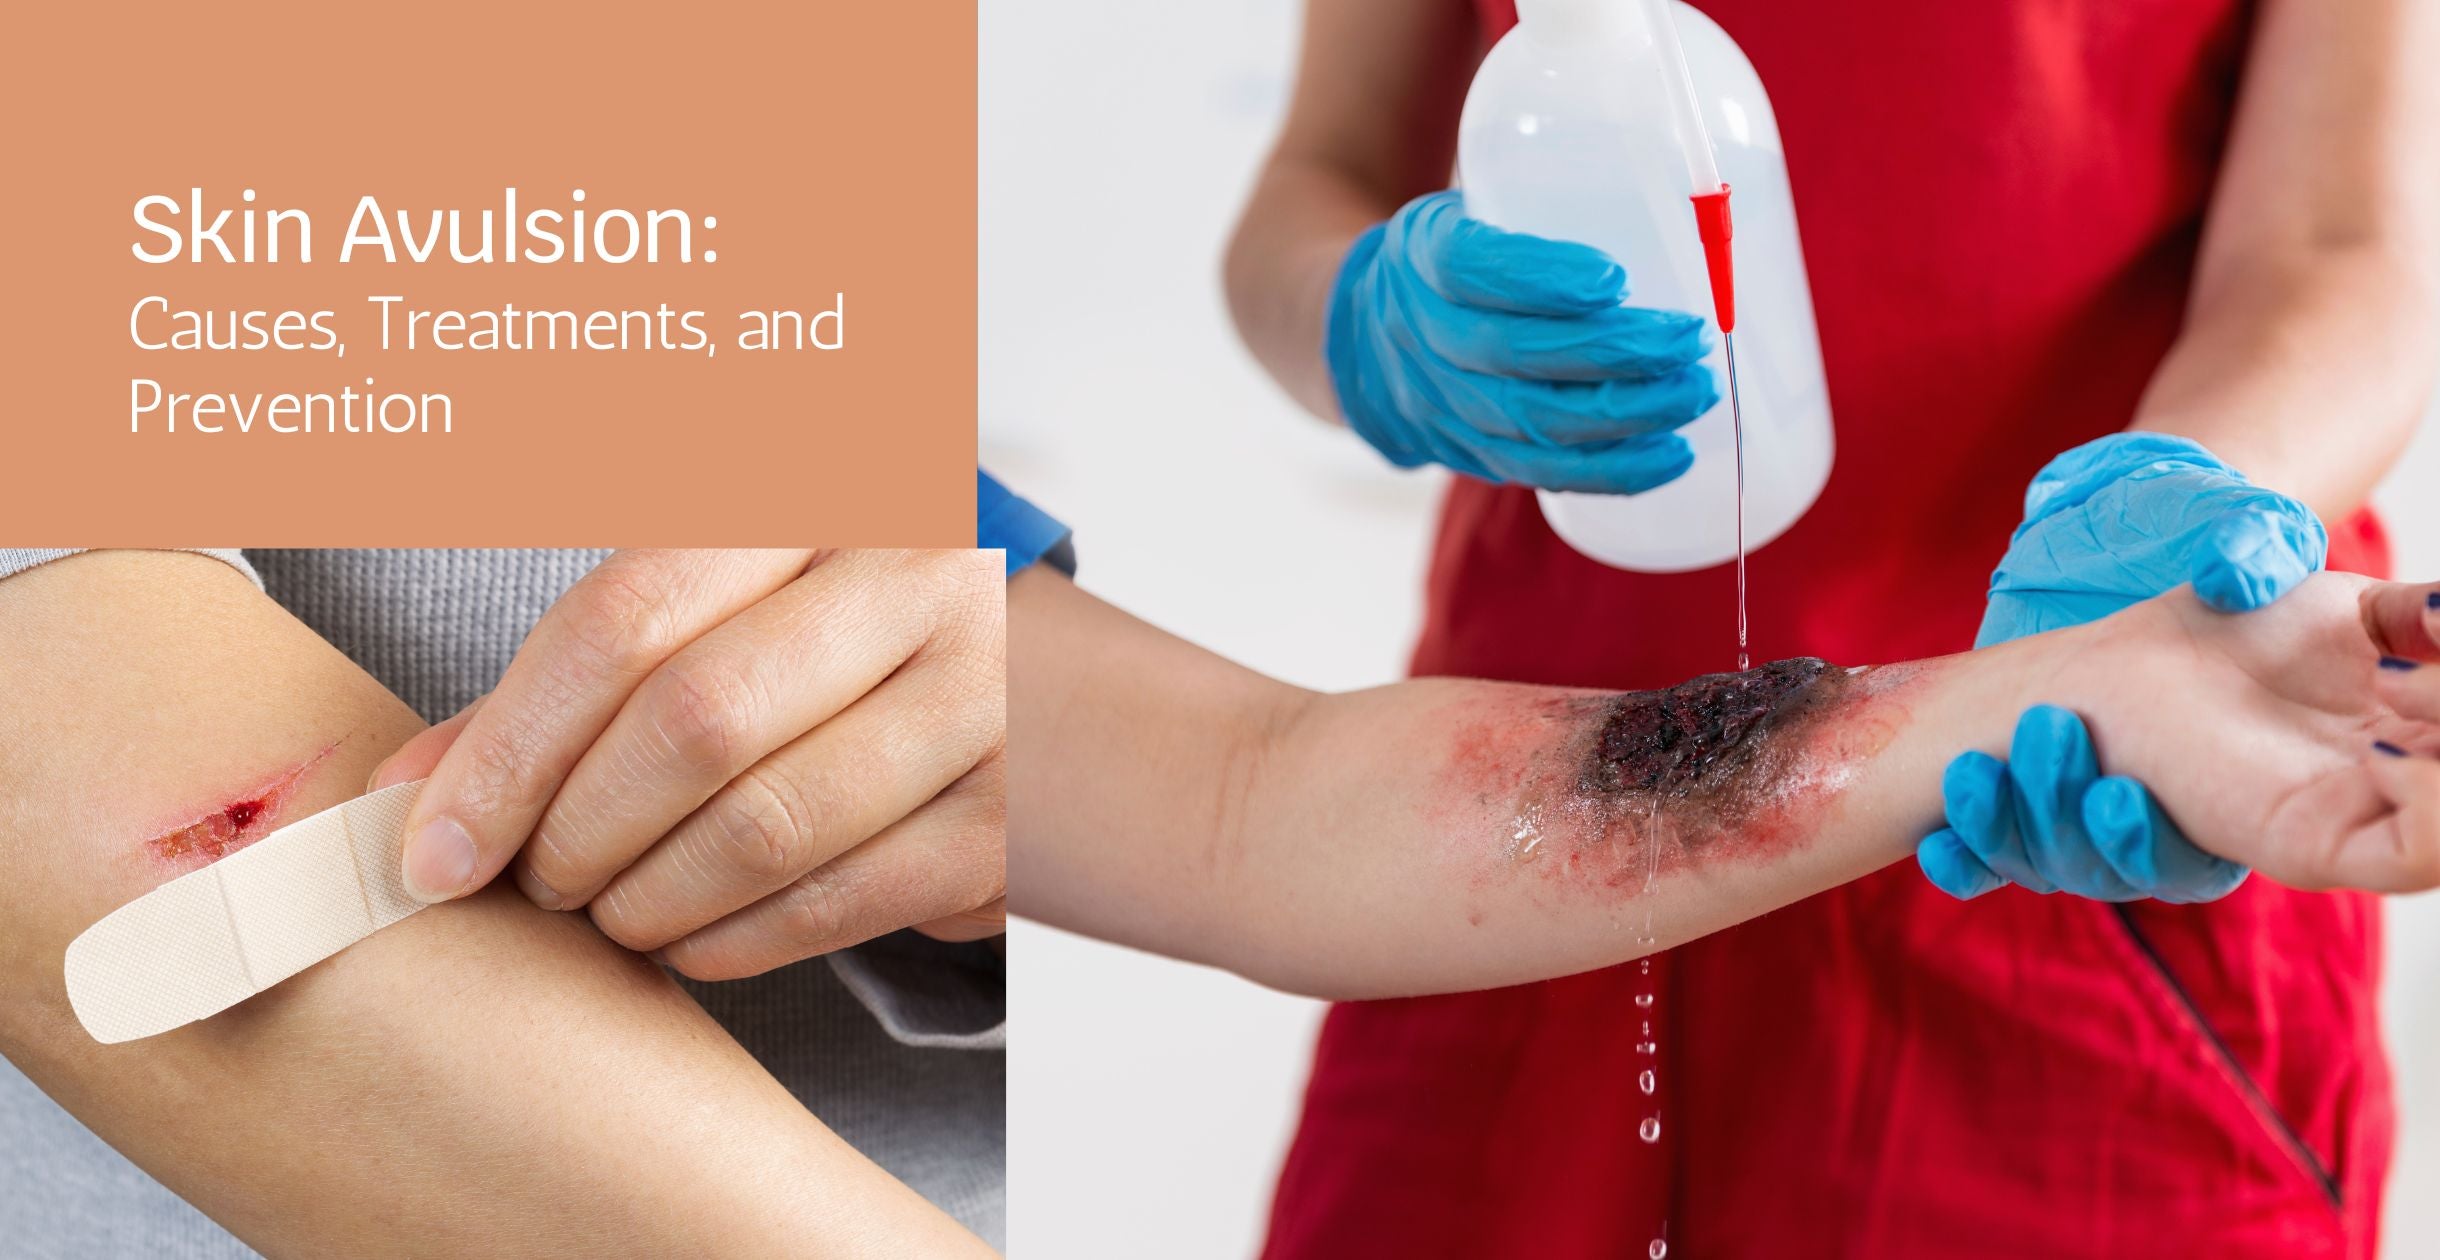 Skin Avulsion: Causes, Treatments, and Prevention